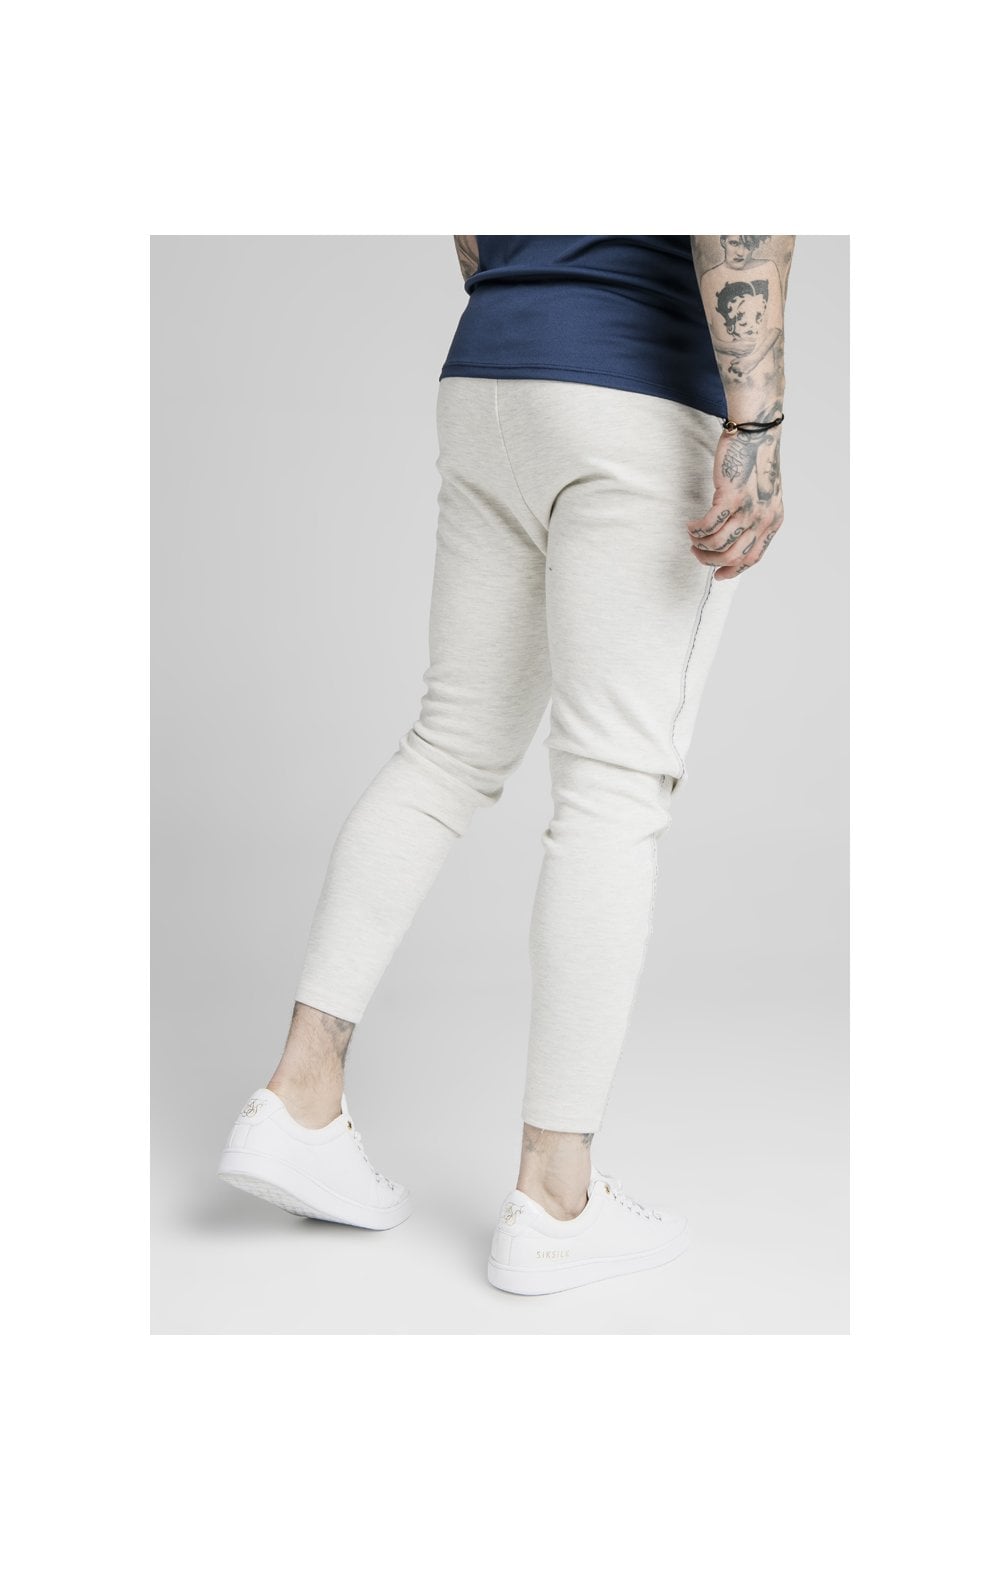 Load image into Gallery viewer, SikSilk Exposed Tape Jogger - Light Grey (1)